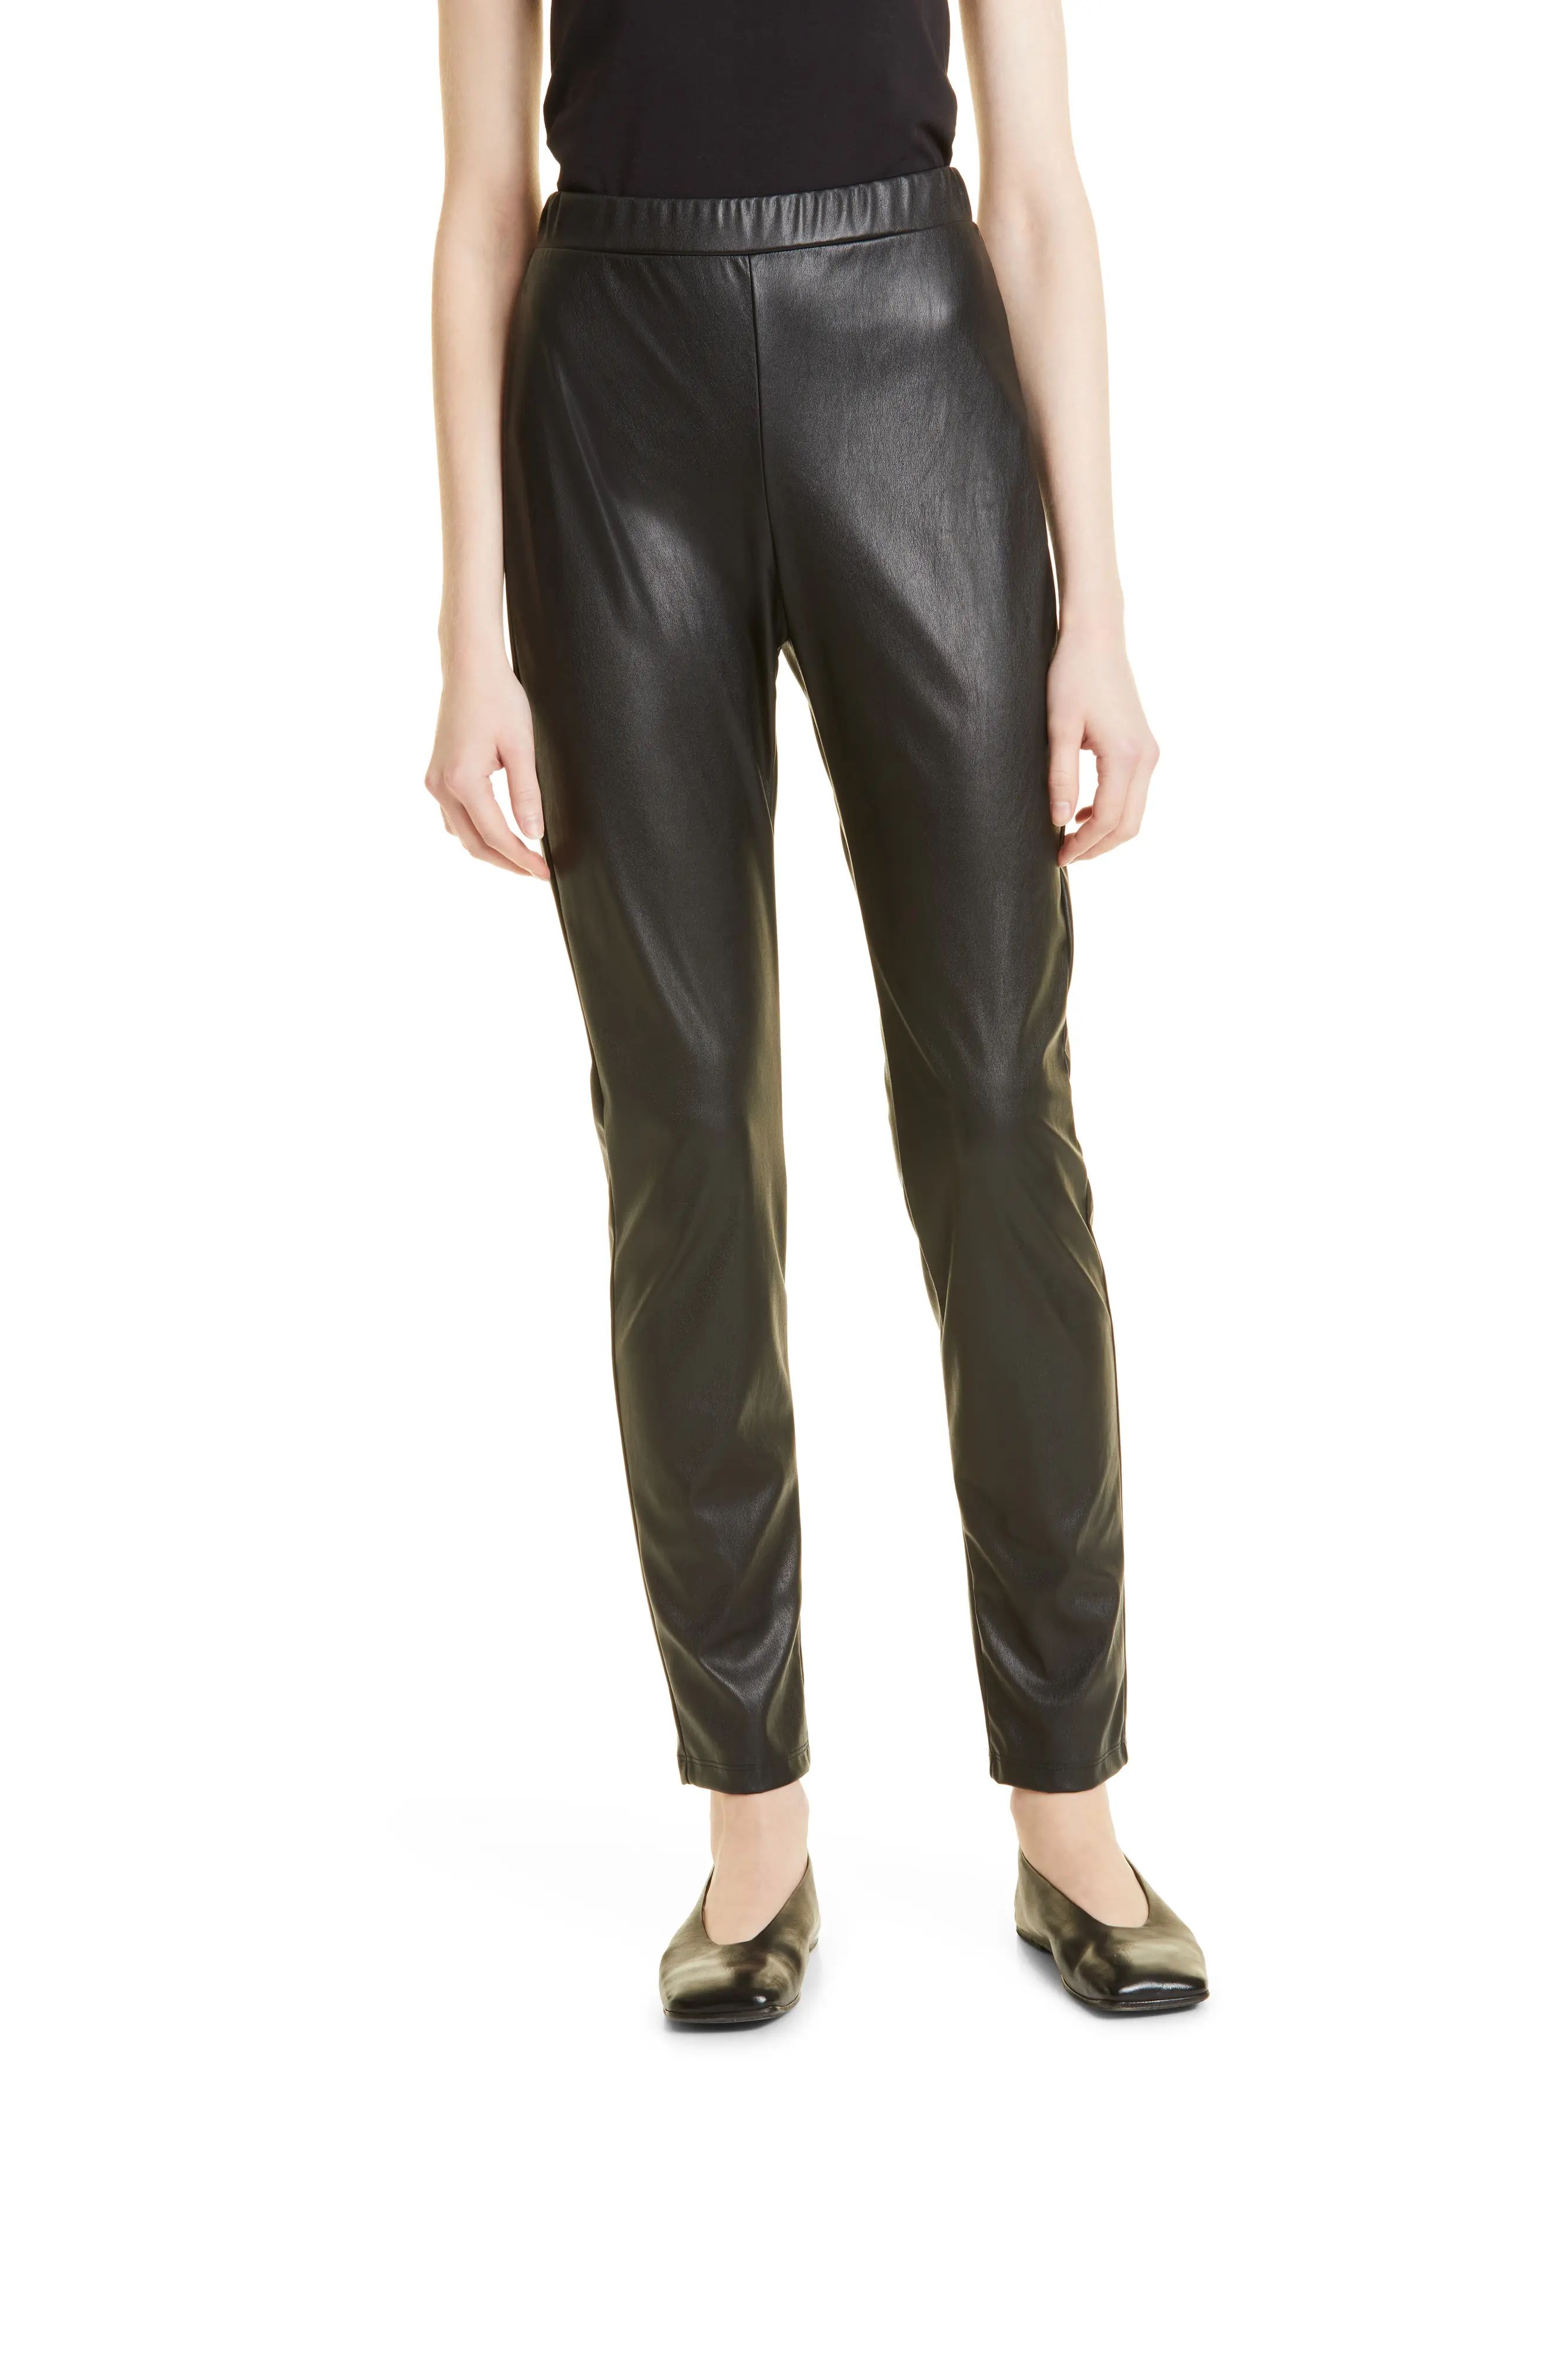 Max Mara Leisure Ranghi Faux Leather Pull-On Pants, Size Medium in Black at Nordstrom | Nordstrom